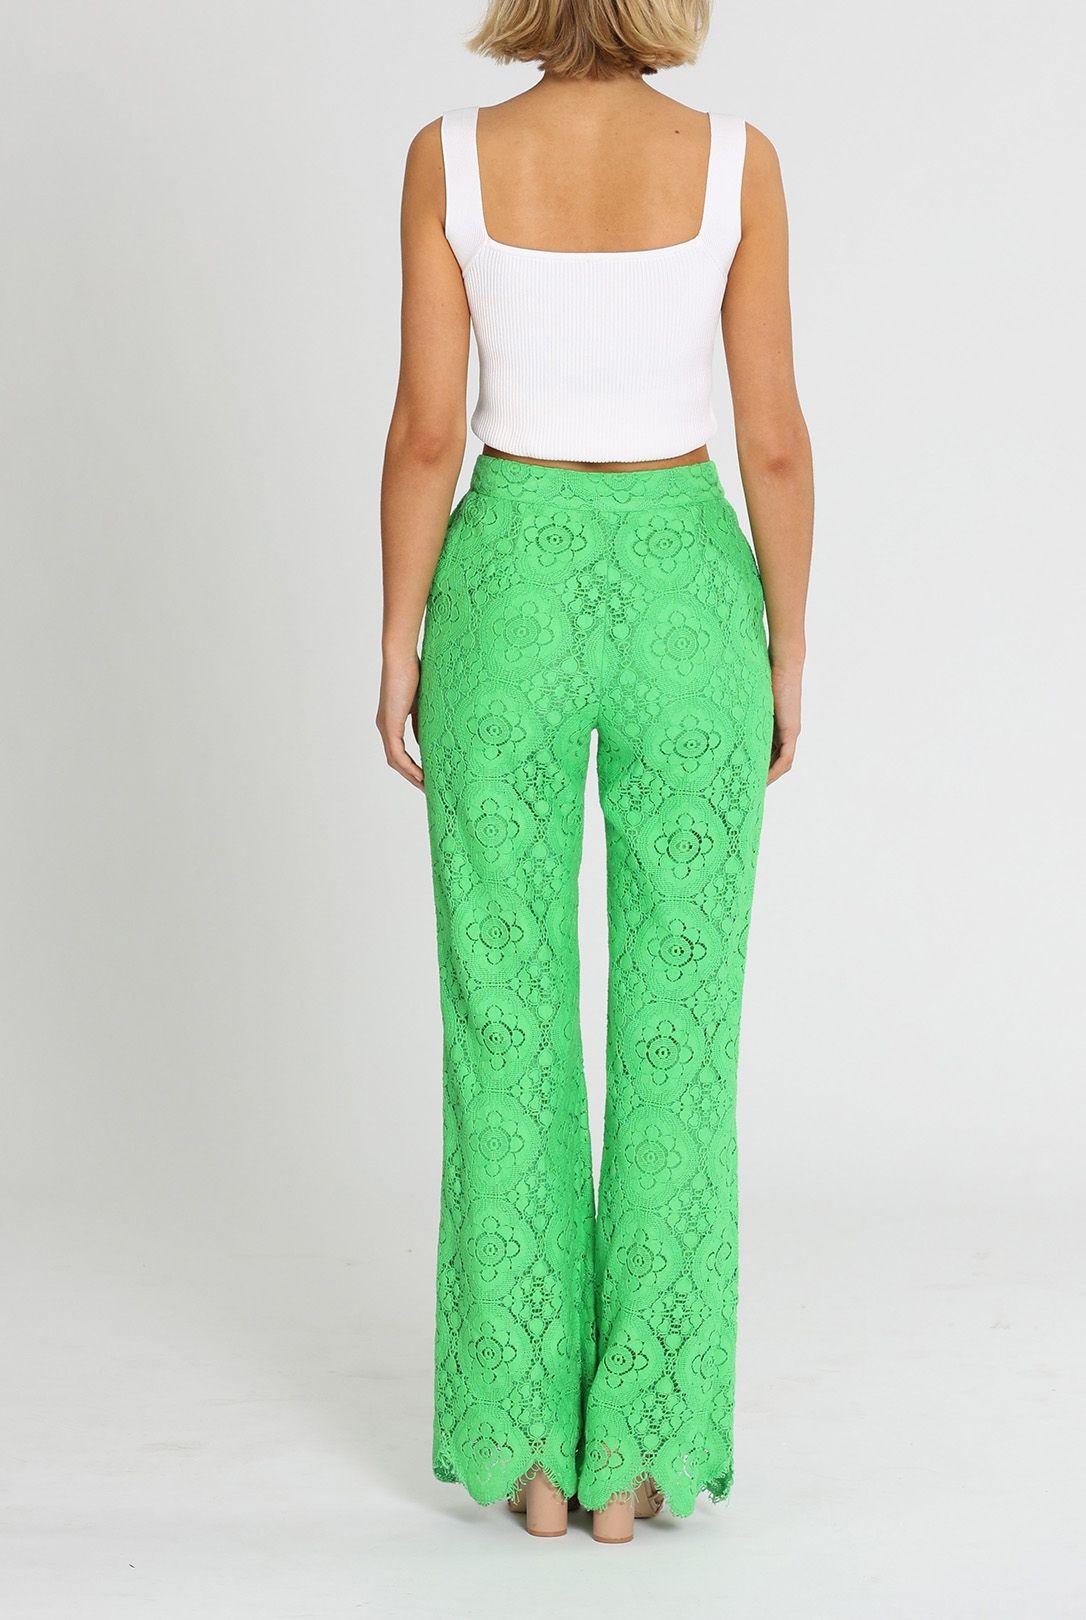 Alice McCall Yvonne Lace Pants Lime High Rise